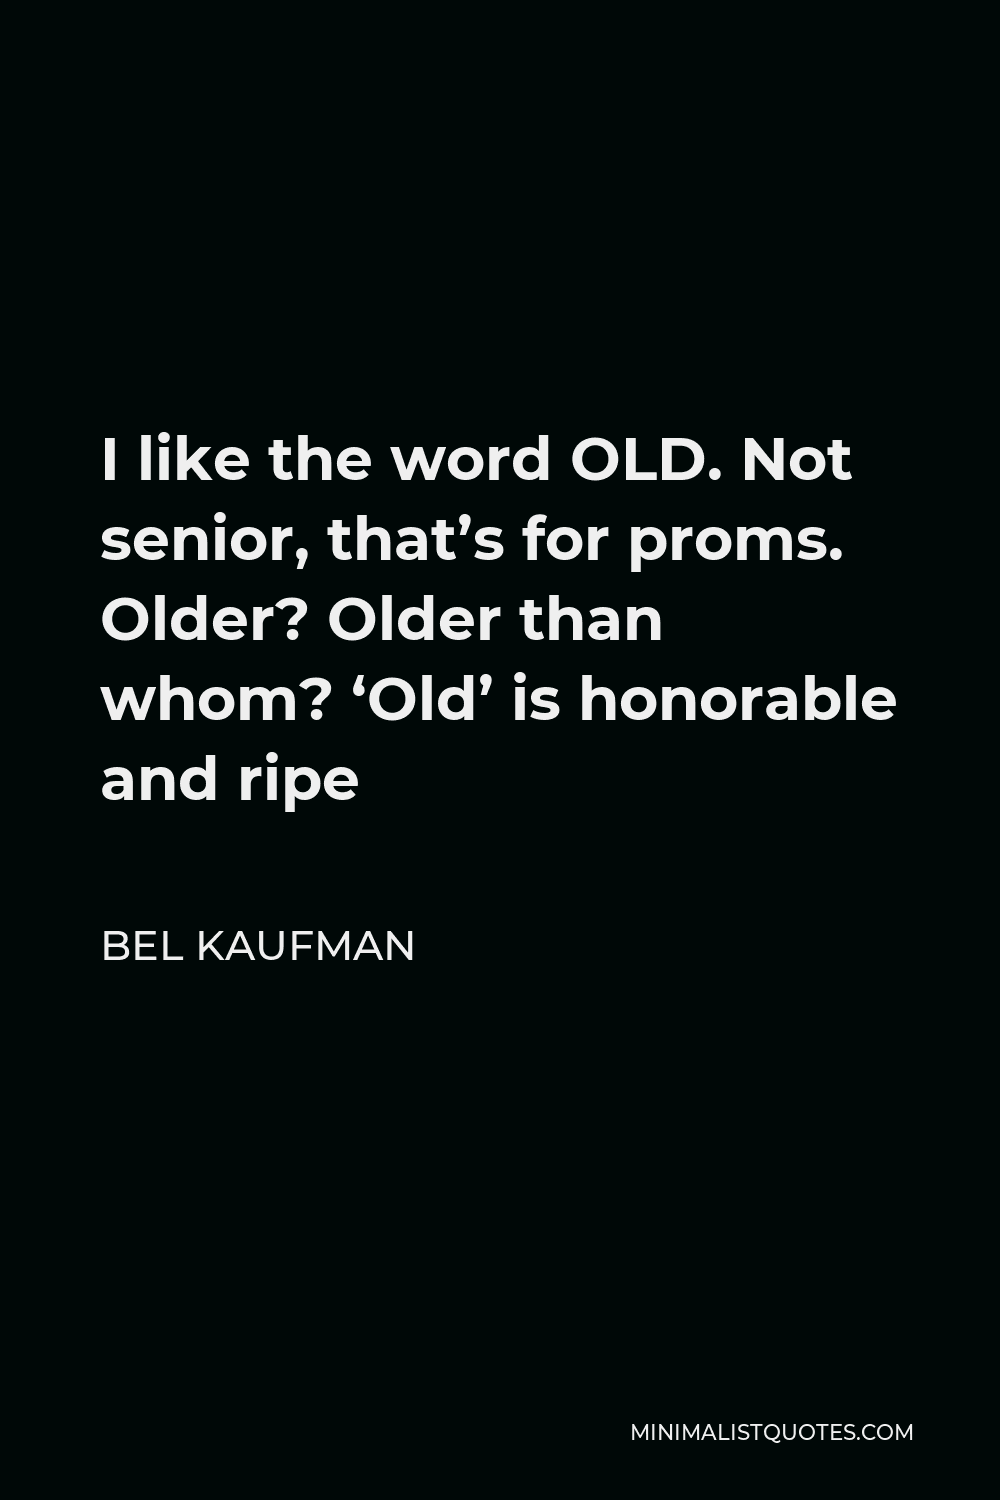 Bel Kaufman Quote - I like the word OLD. Not senior, that’s for proms. Older? Older than whom? ‘Old’ is honorable and ripe